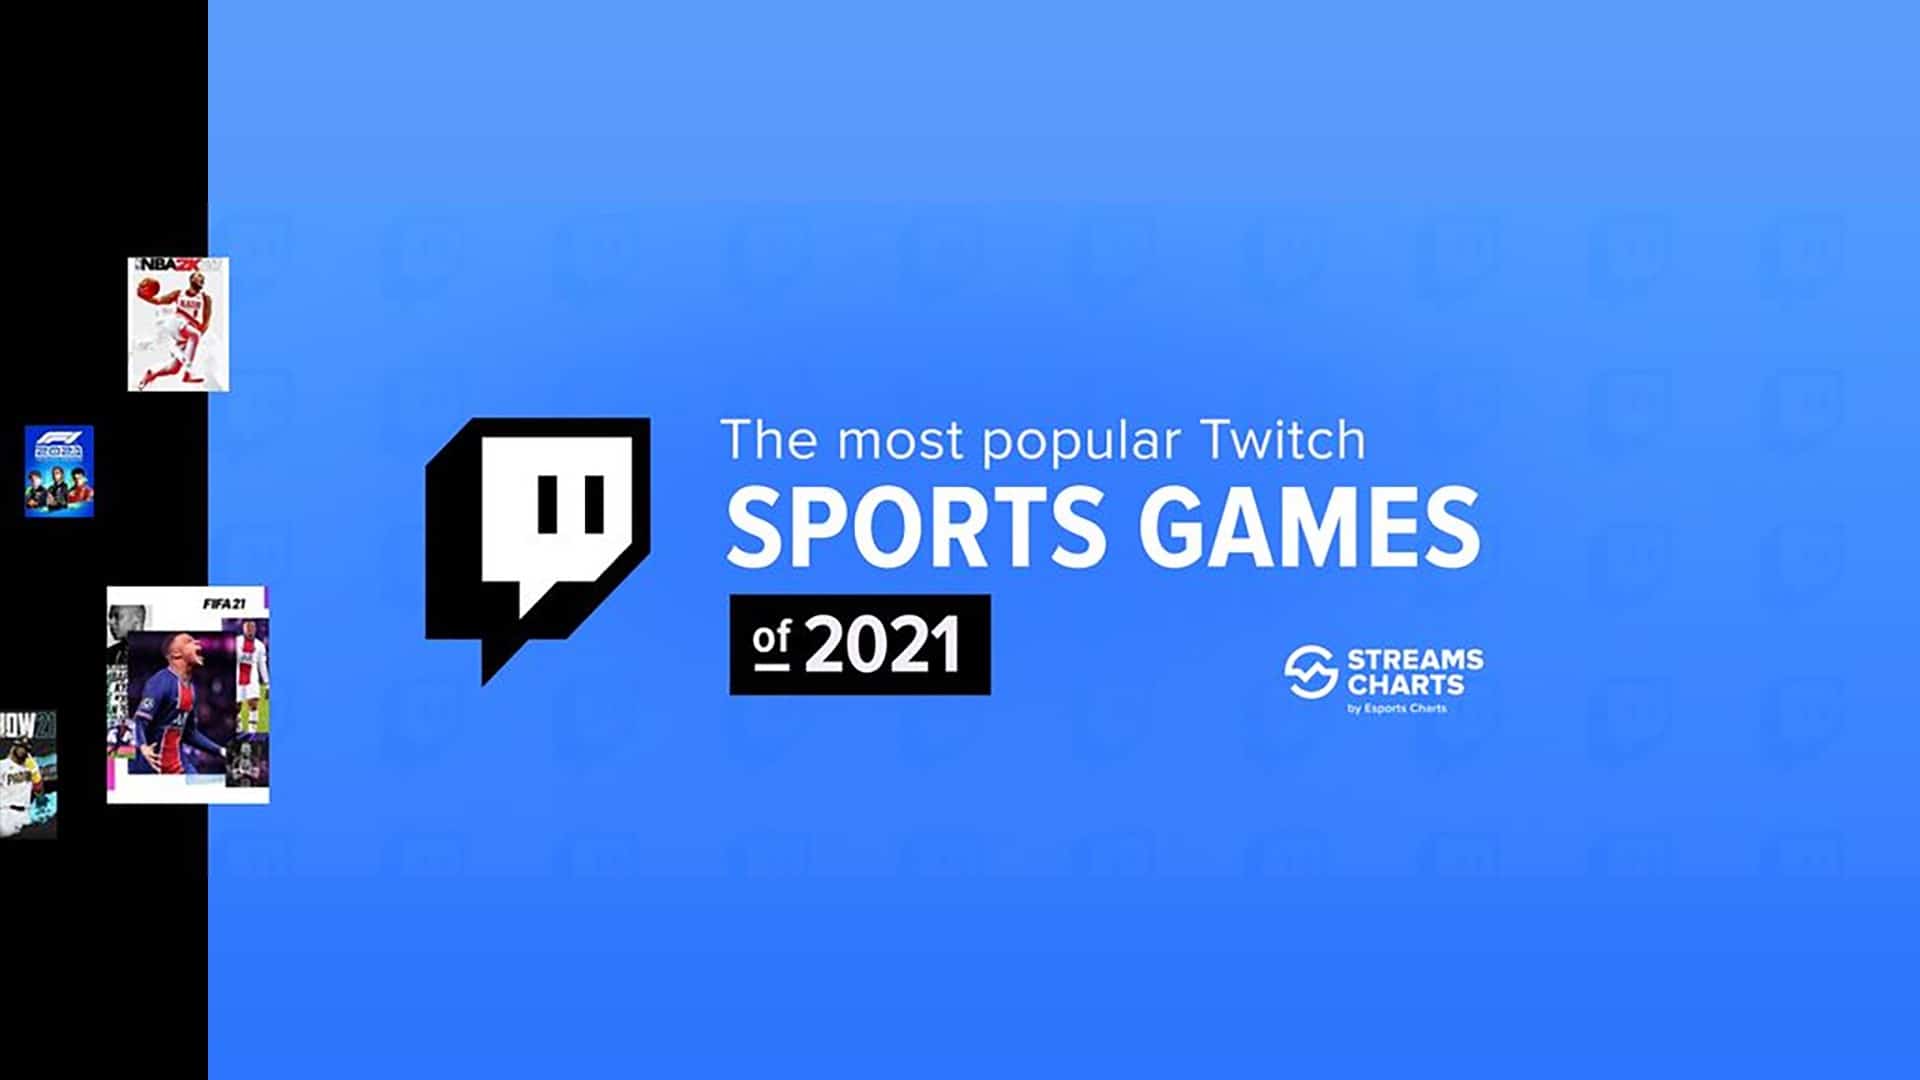 Trackmania, iRacing, F1 2021 among Top 10 Sports games streamed on Twitch in 2021